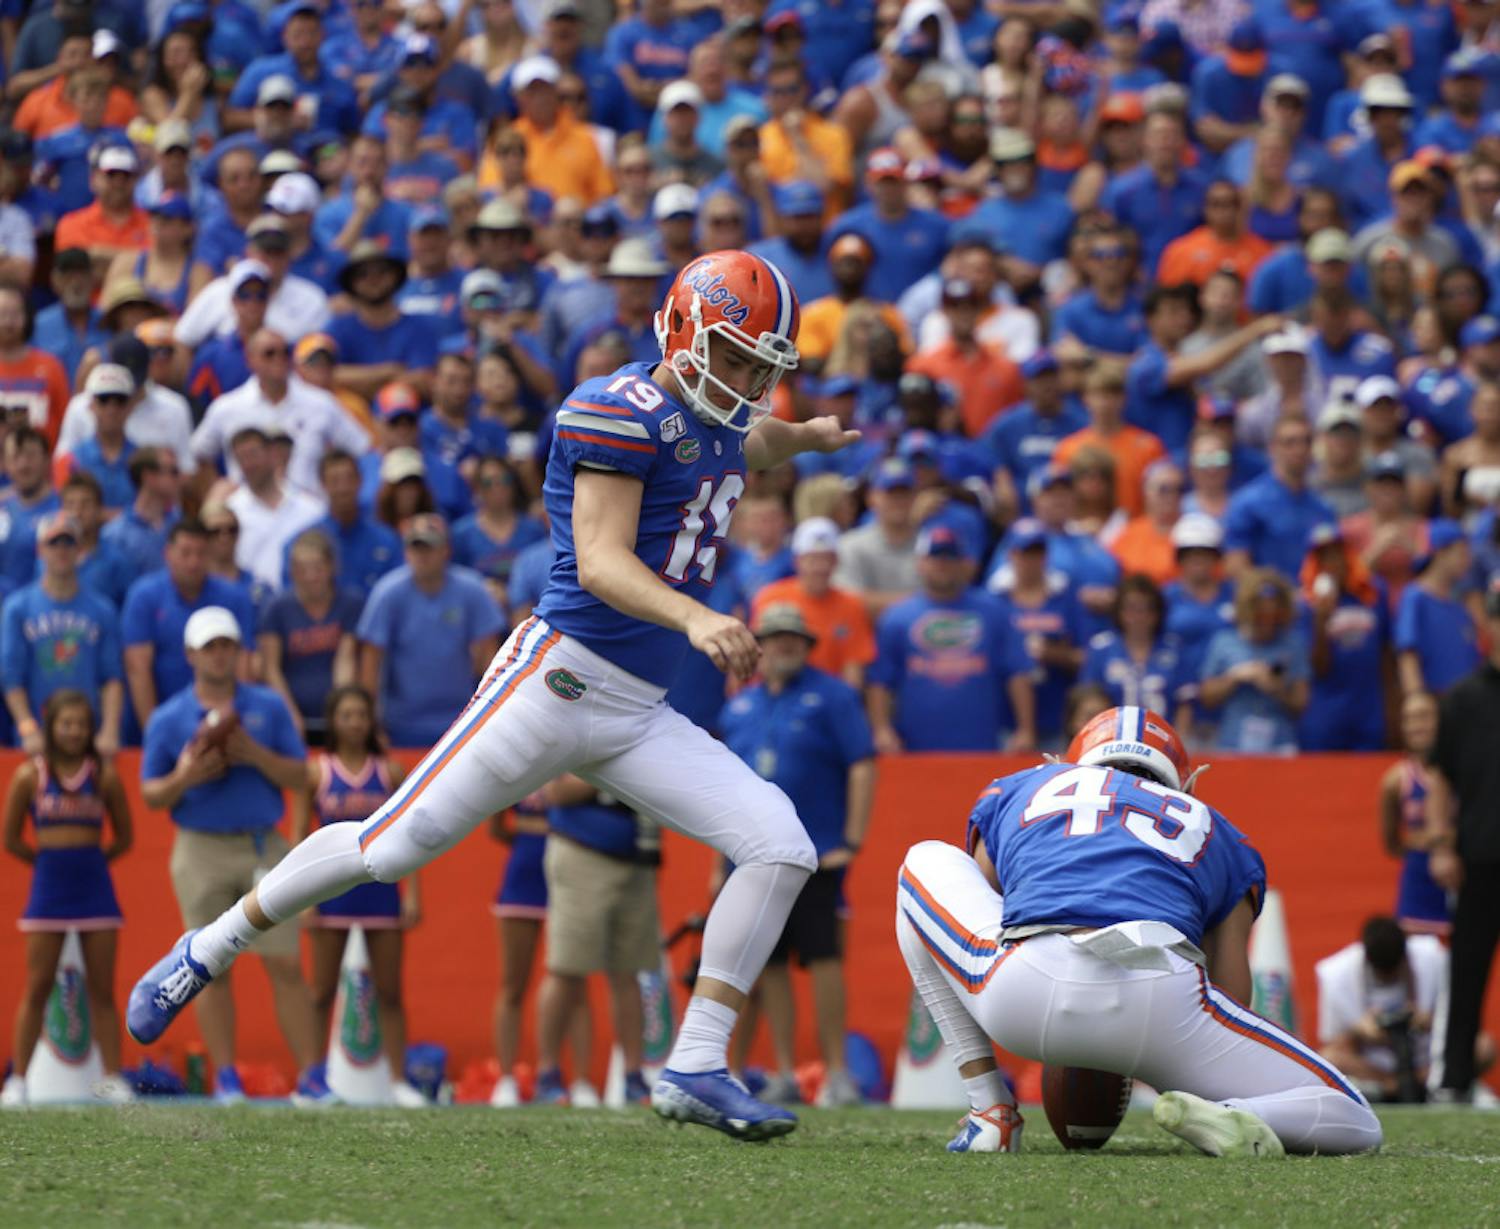 Gators kicker Evan McPherson said that holidays away from home is one of the sacrifices he makes to play Division I football at UF.